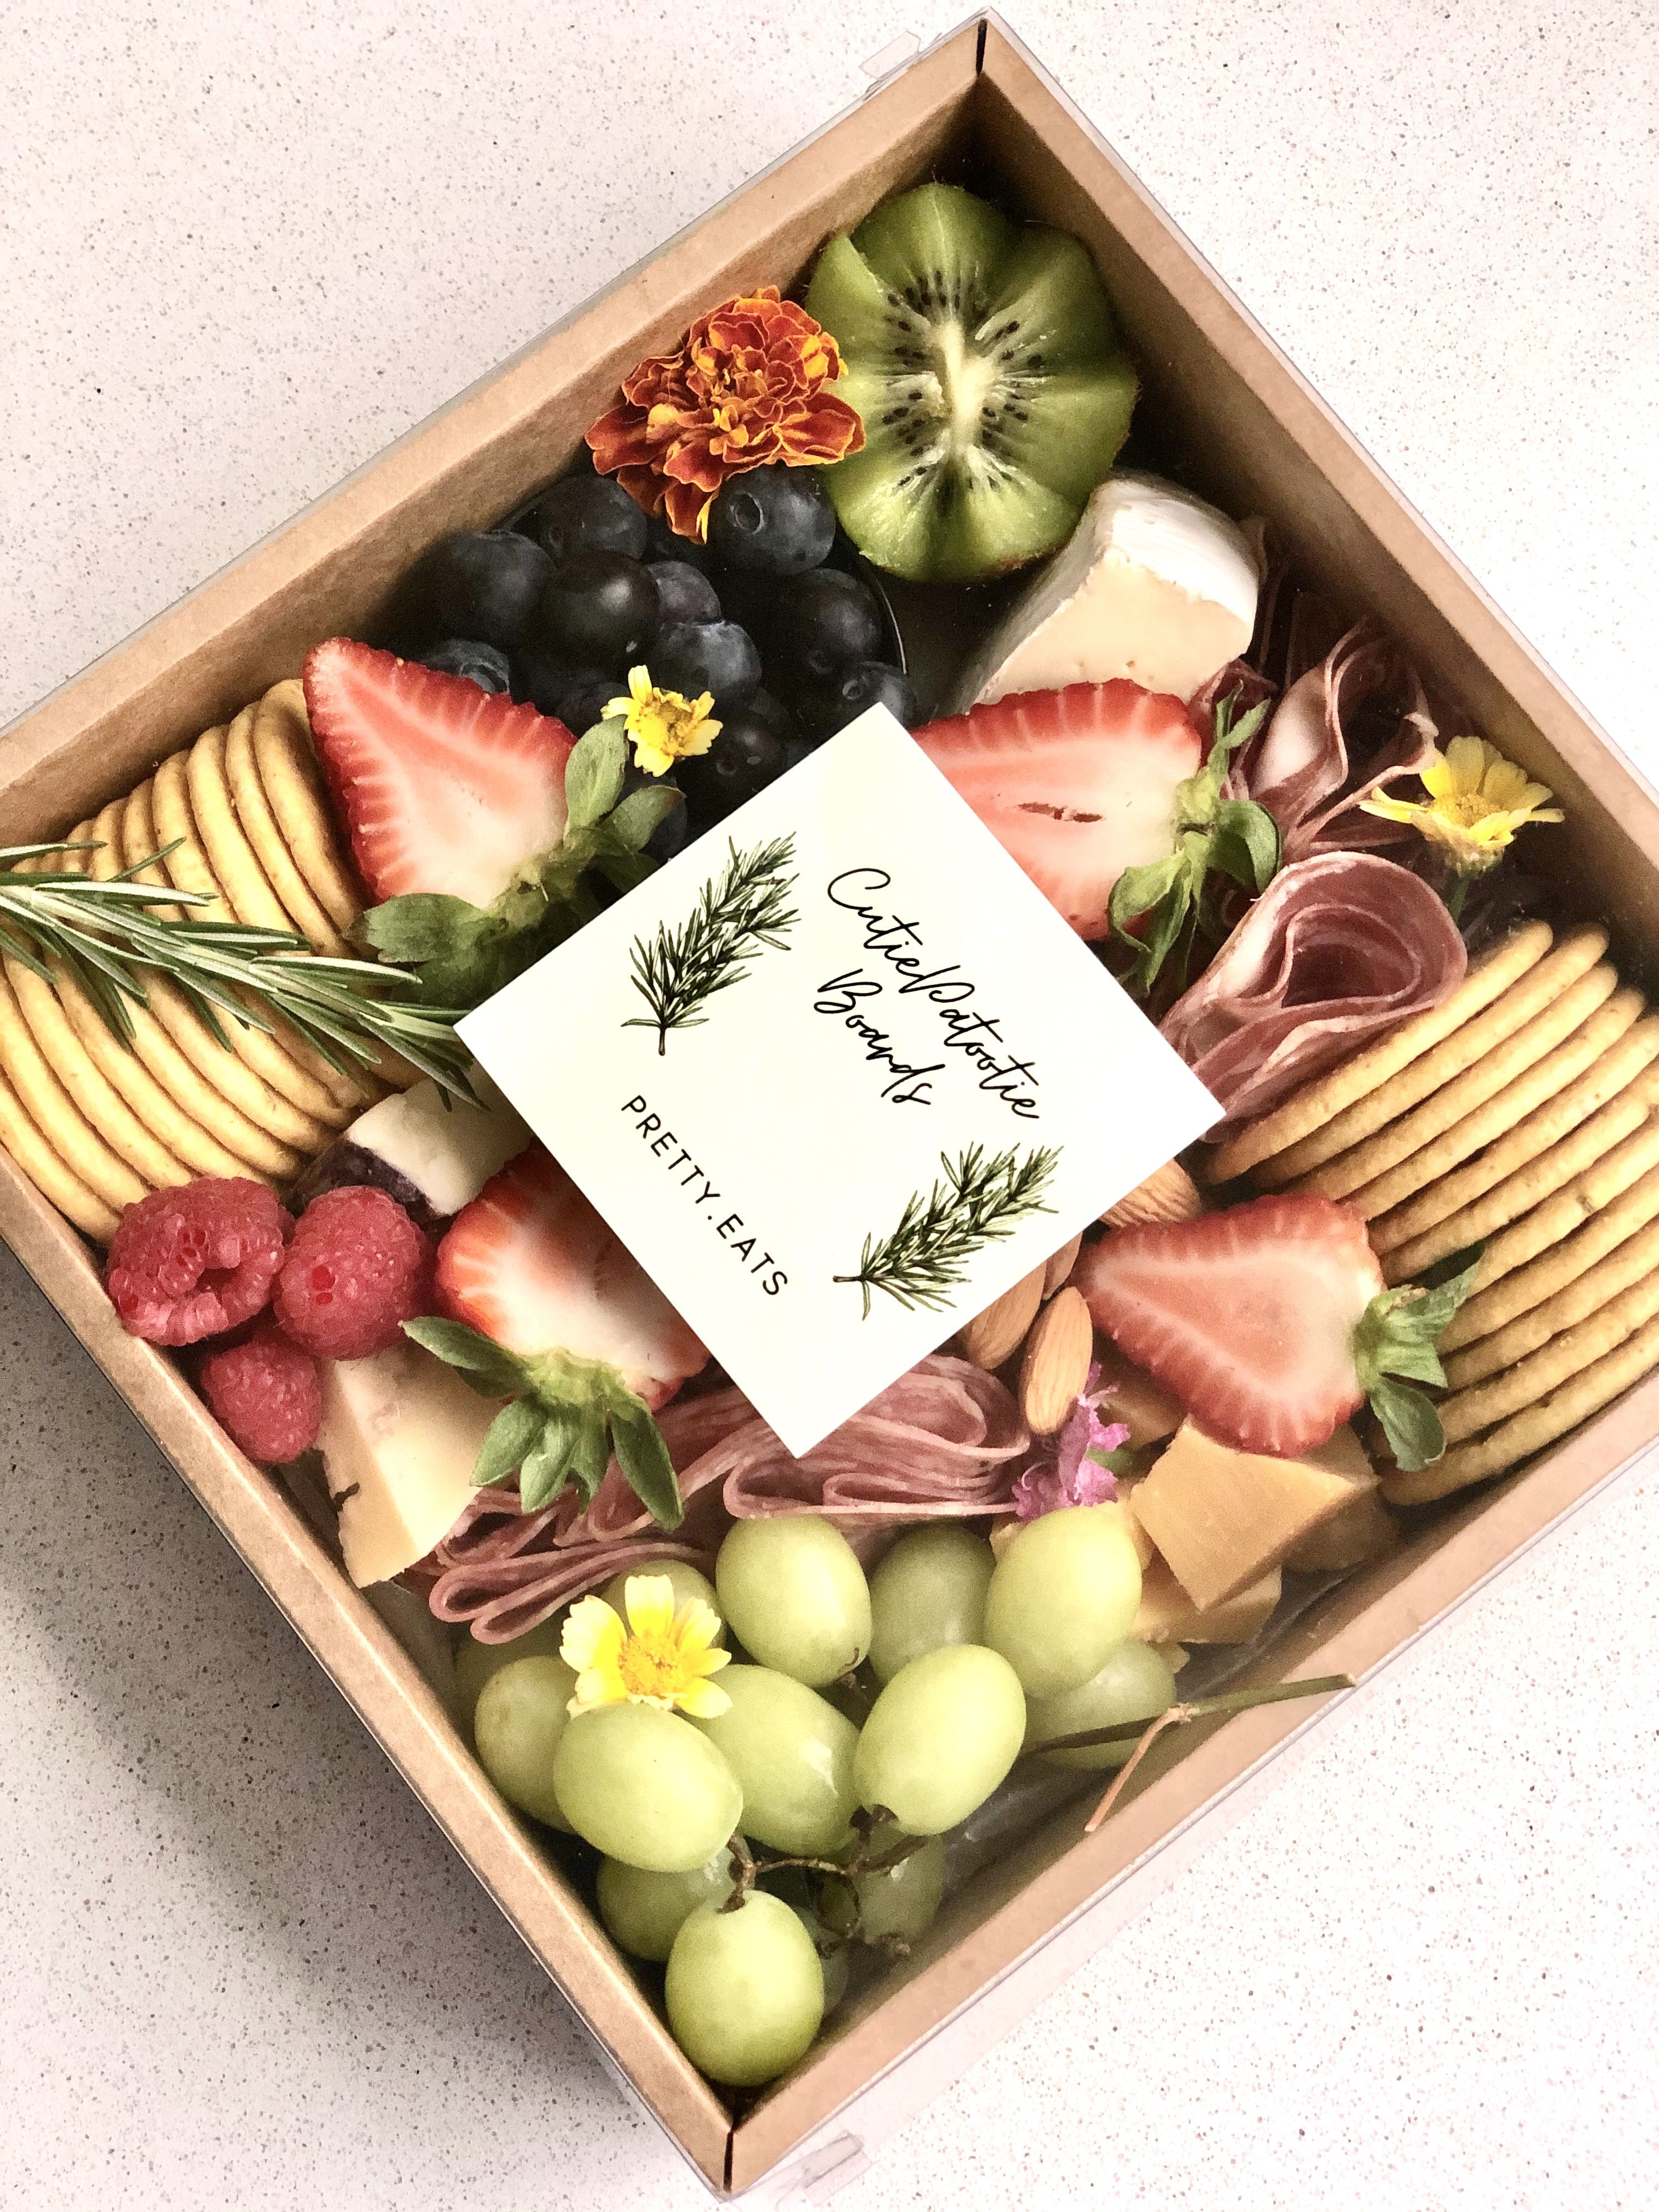 Charcuterie Box | Charcuterie gifts, Food gift box, Charcuterie picnic